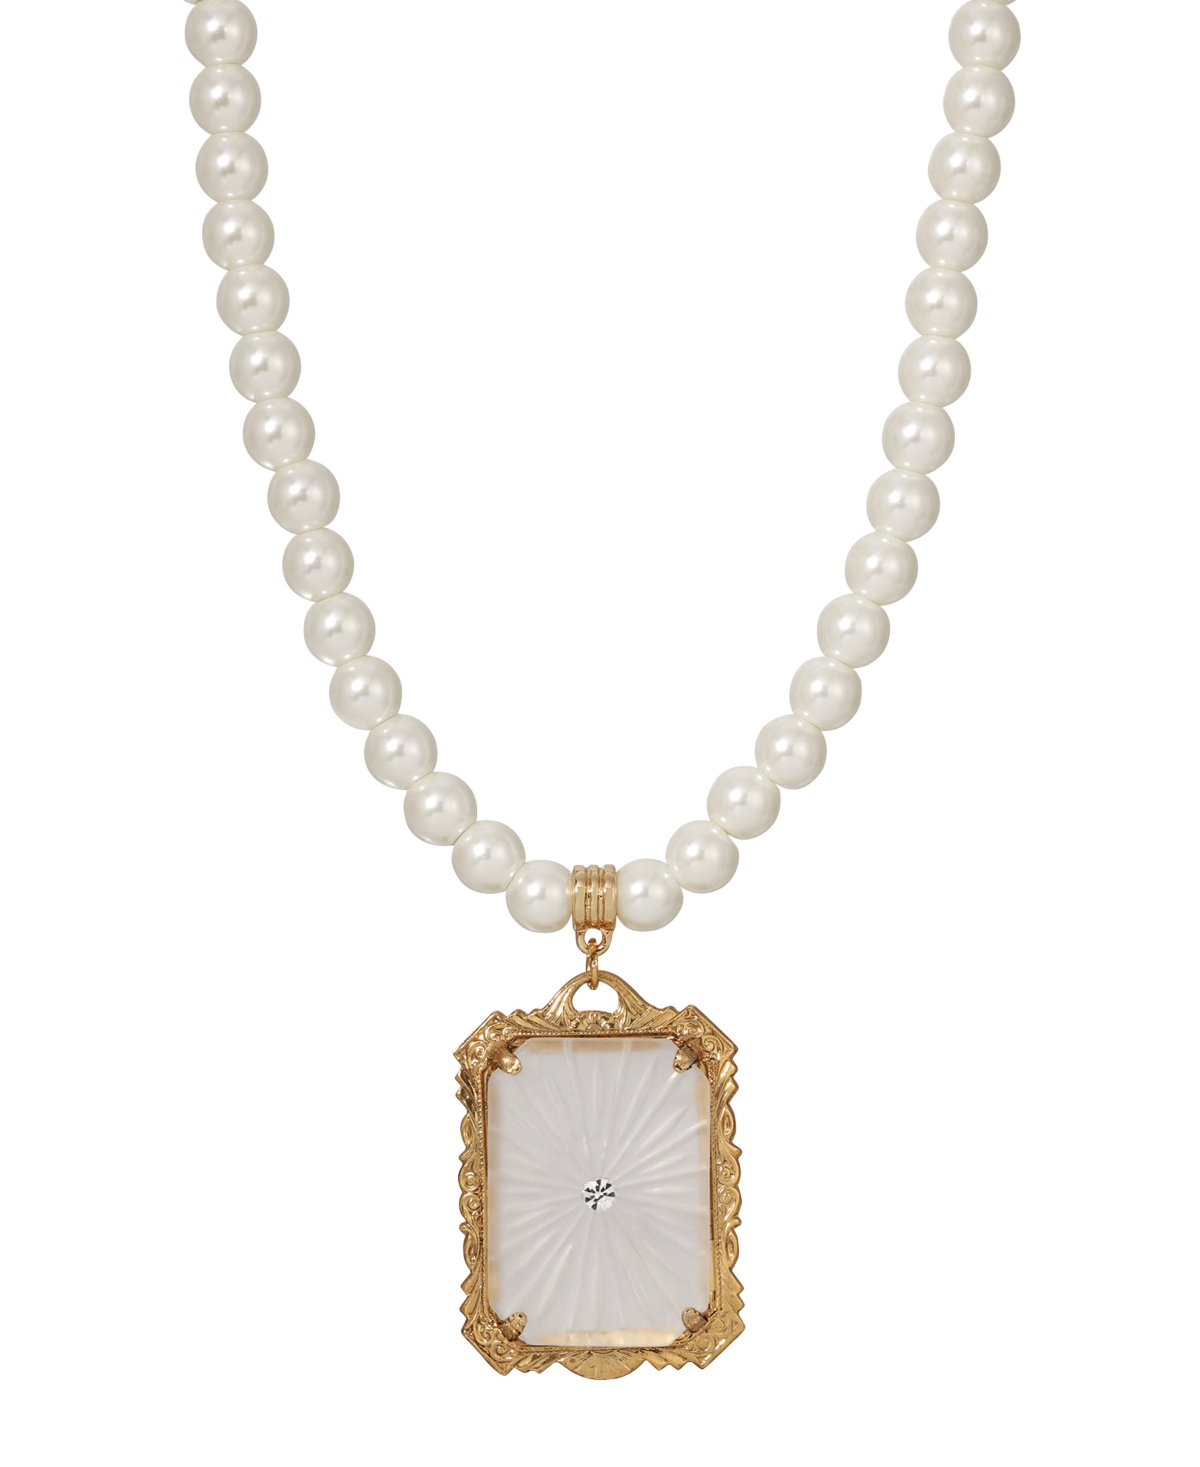 2028 Gold-tone Frosted Lalique Inspired Square Pendant Necklace In White